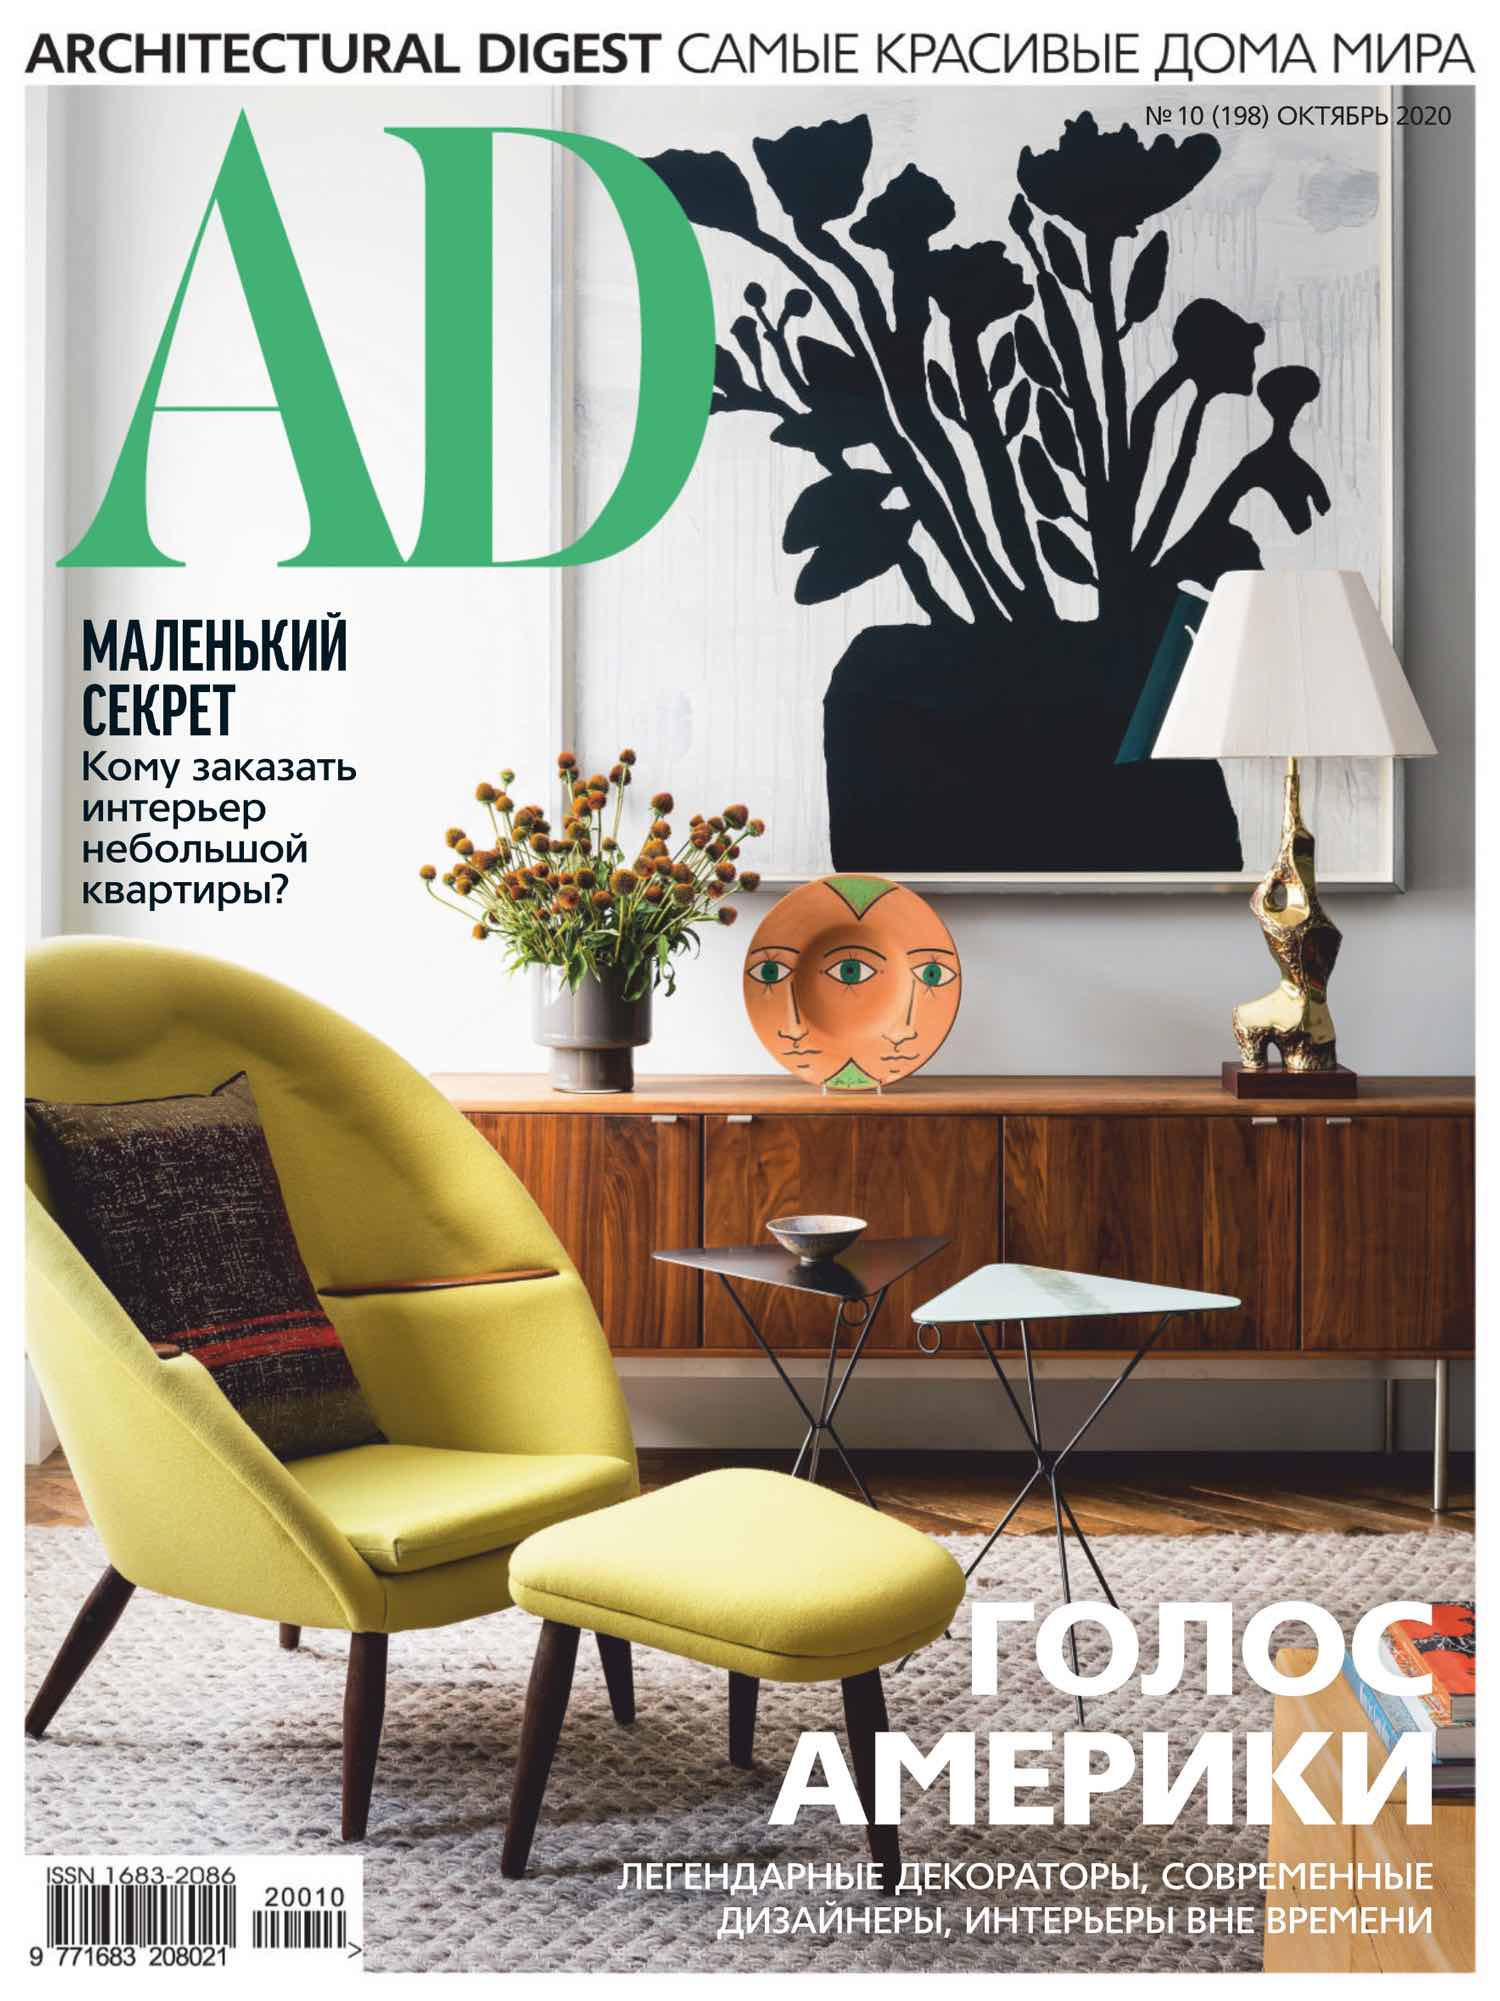 An image of the cover of October 2020 of AD Russia featuring interior design by Carol Egan Interiors.